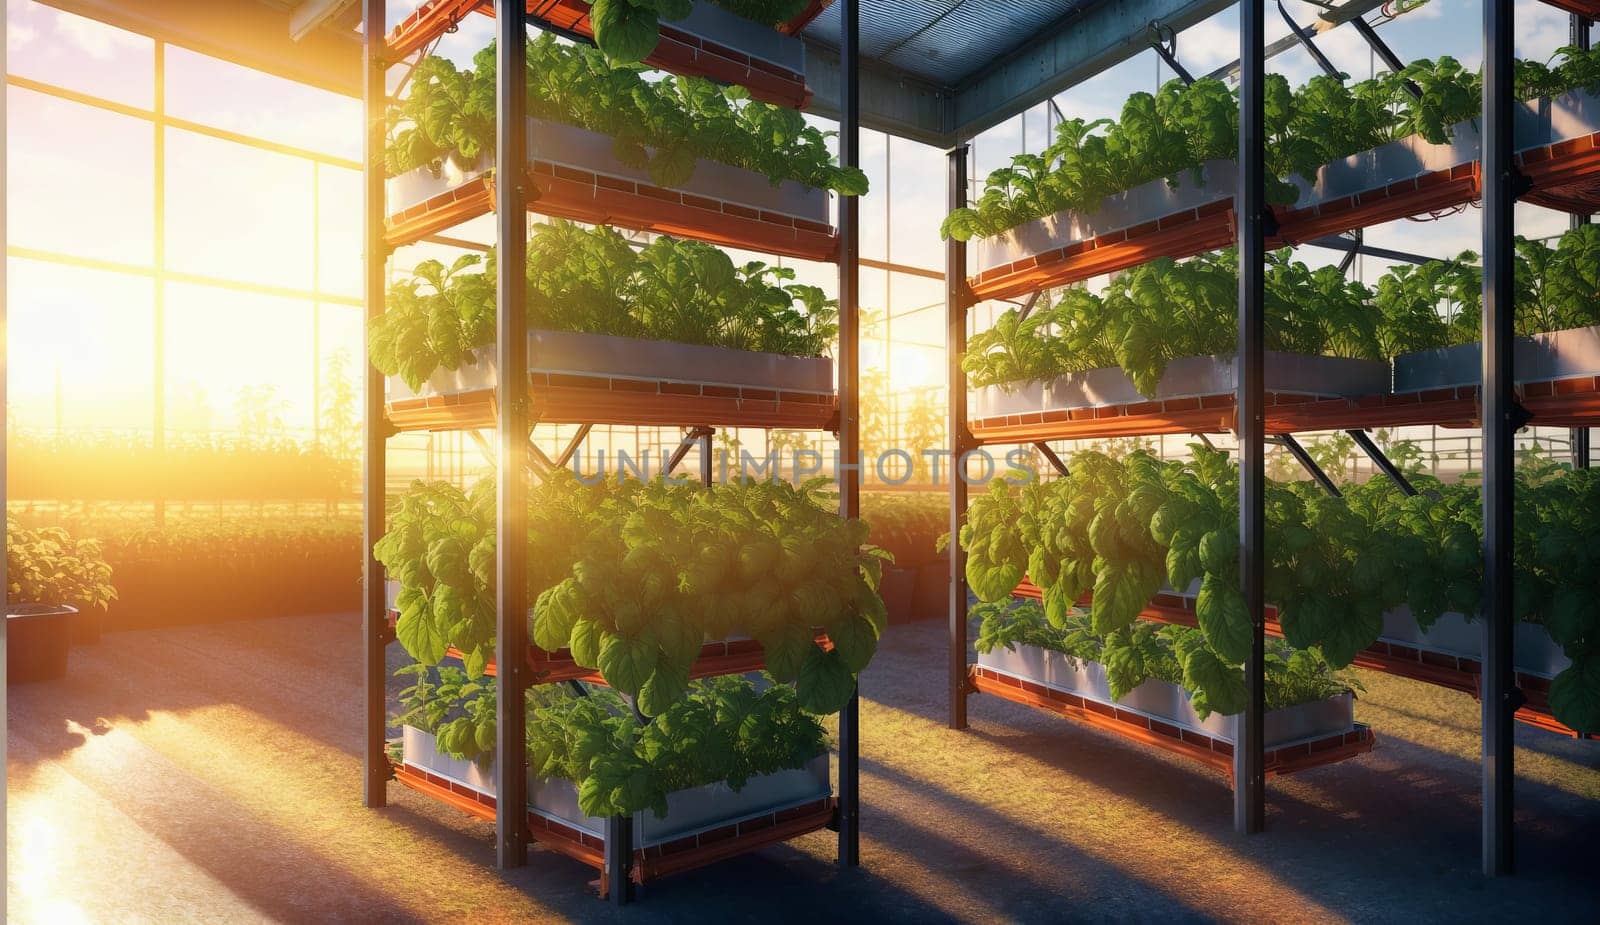 A building with large windows showcasing a greenhouse filled with plants, framed by a beautiful sunset in the background